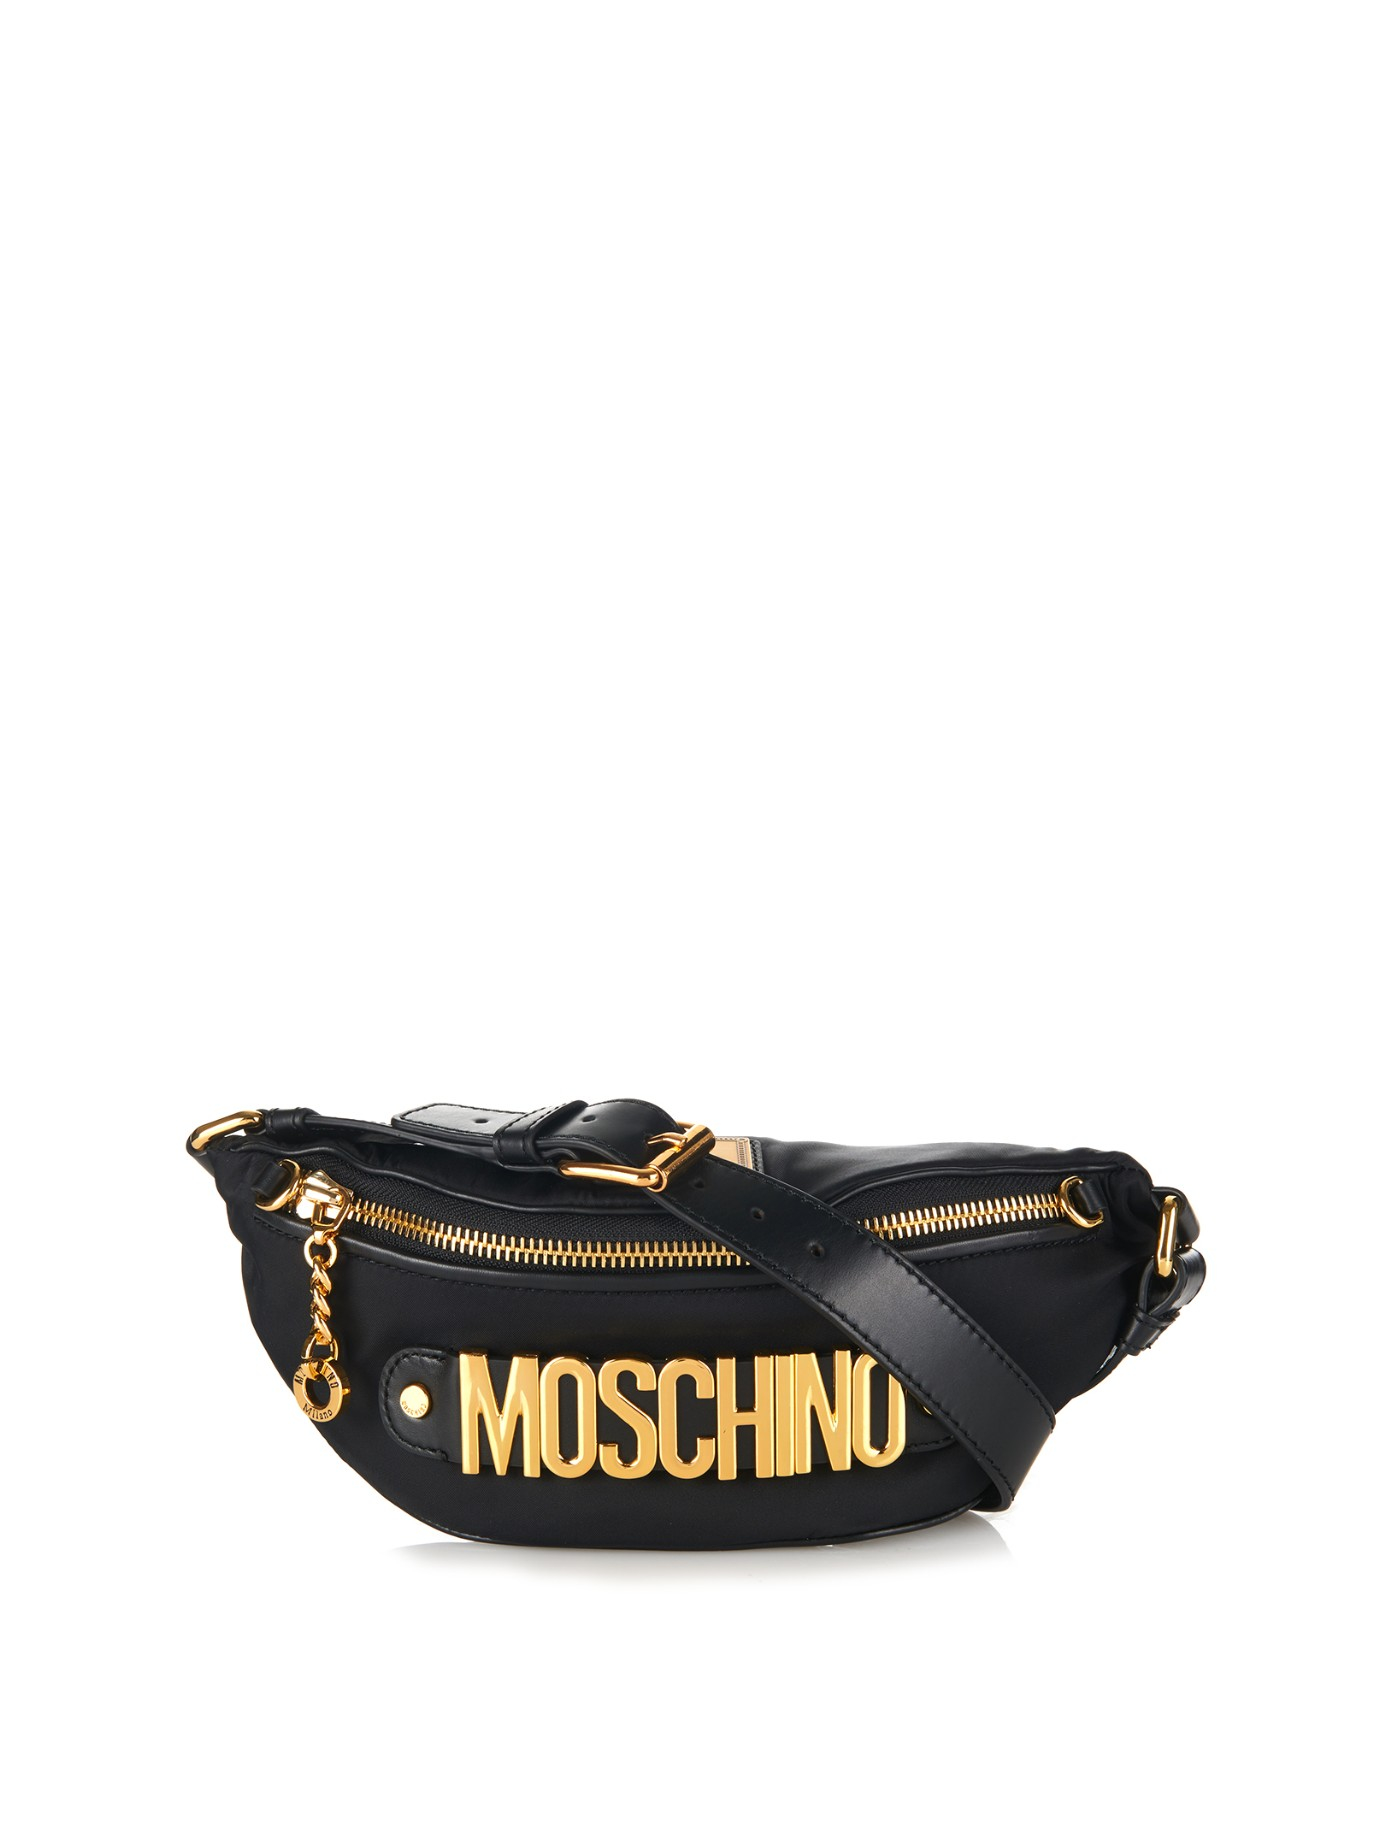 Lyst - Moschino Lettering Leather And Nylon Belt Bag in Black